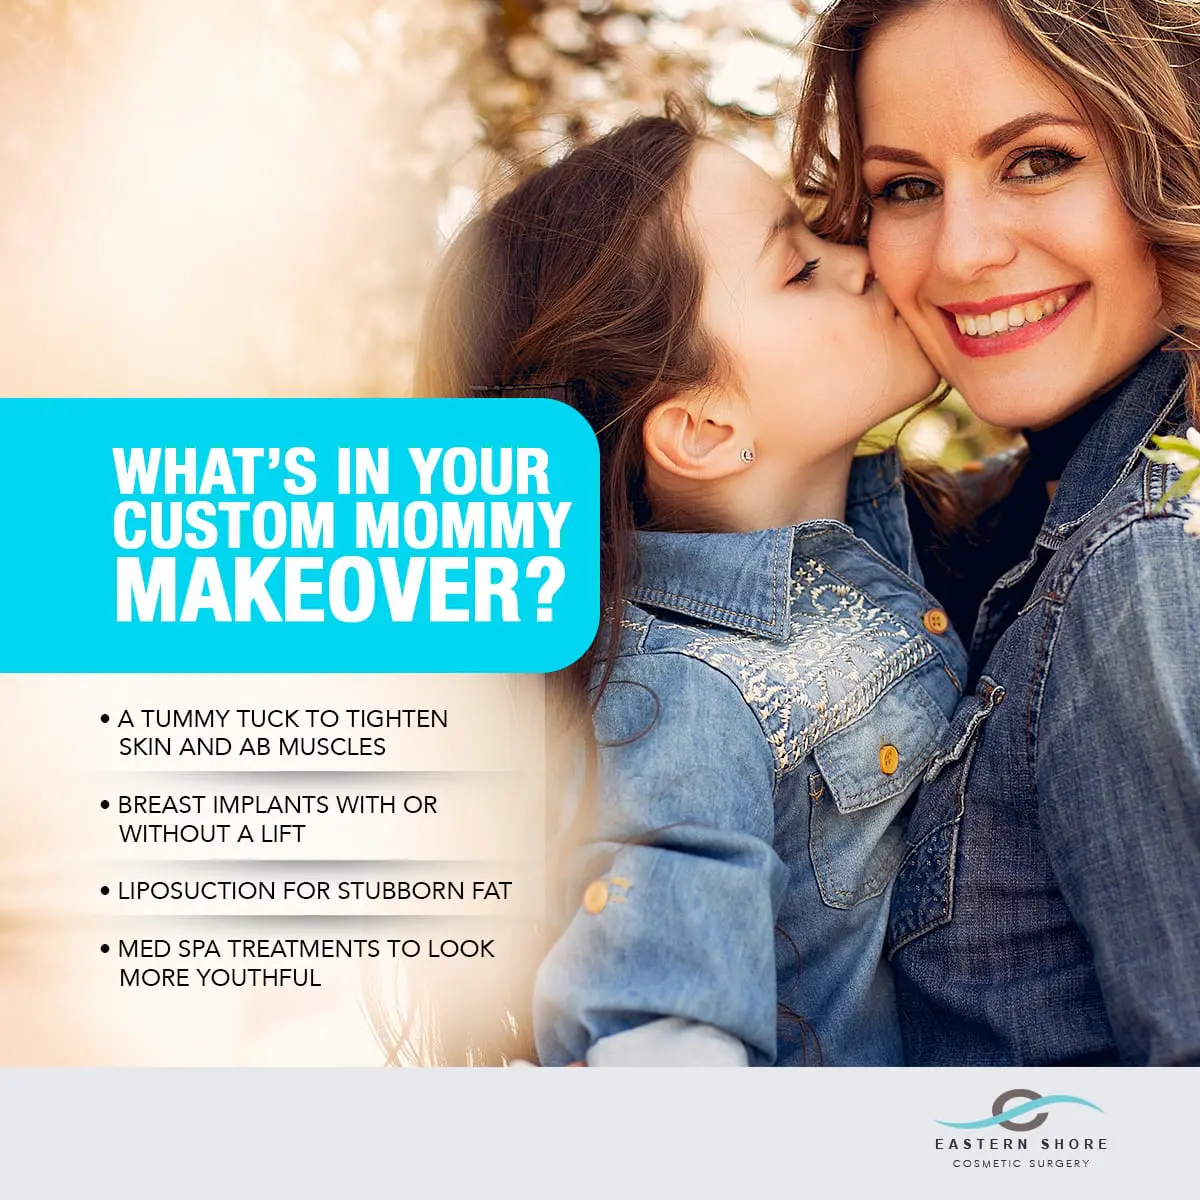 What's In Your Custom Mommy Makeover? [Infographic]